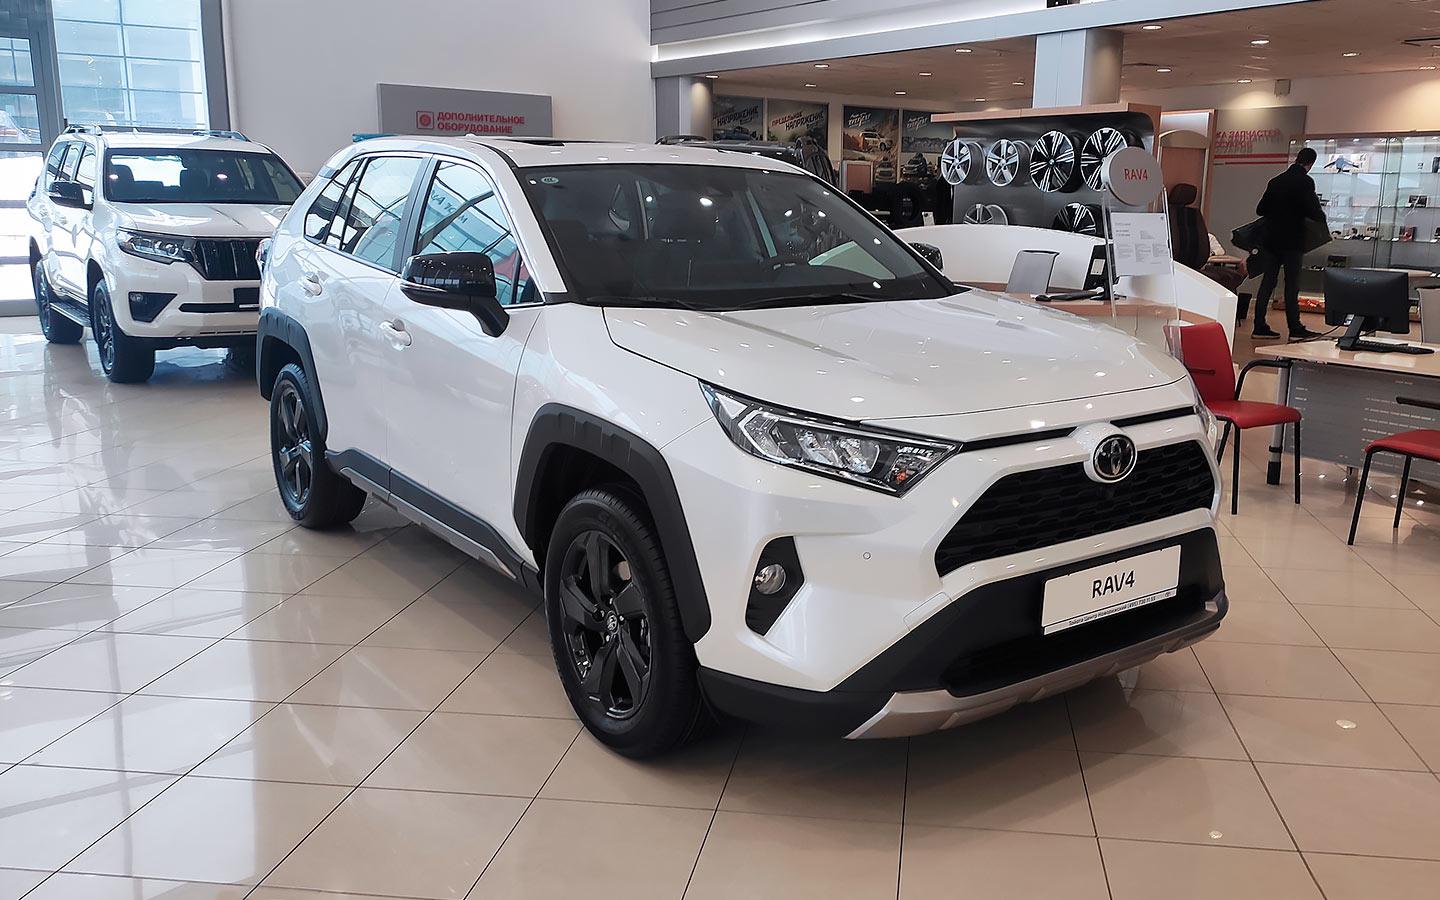 Toyota RAV4 crossovers imported by parallel imports fell in price in Russia